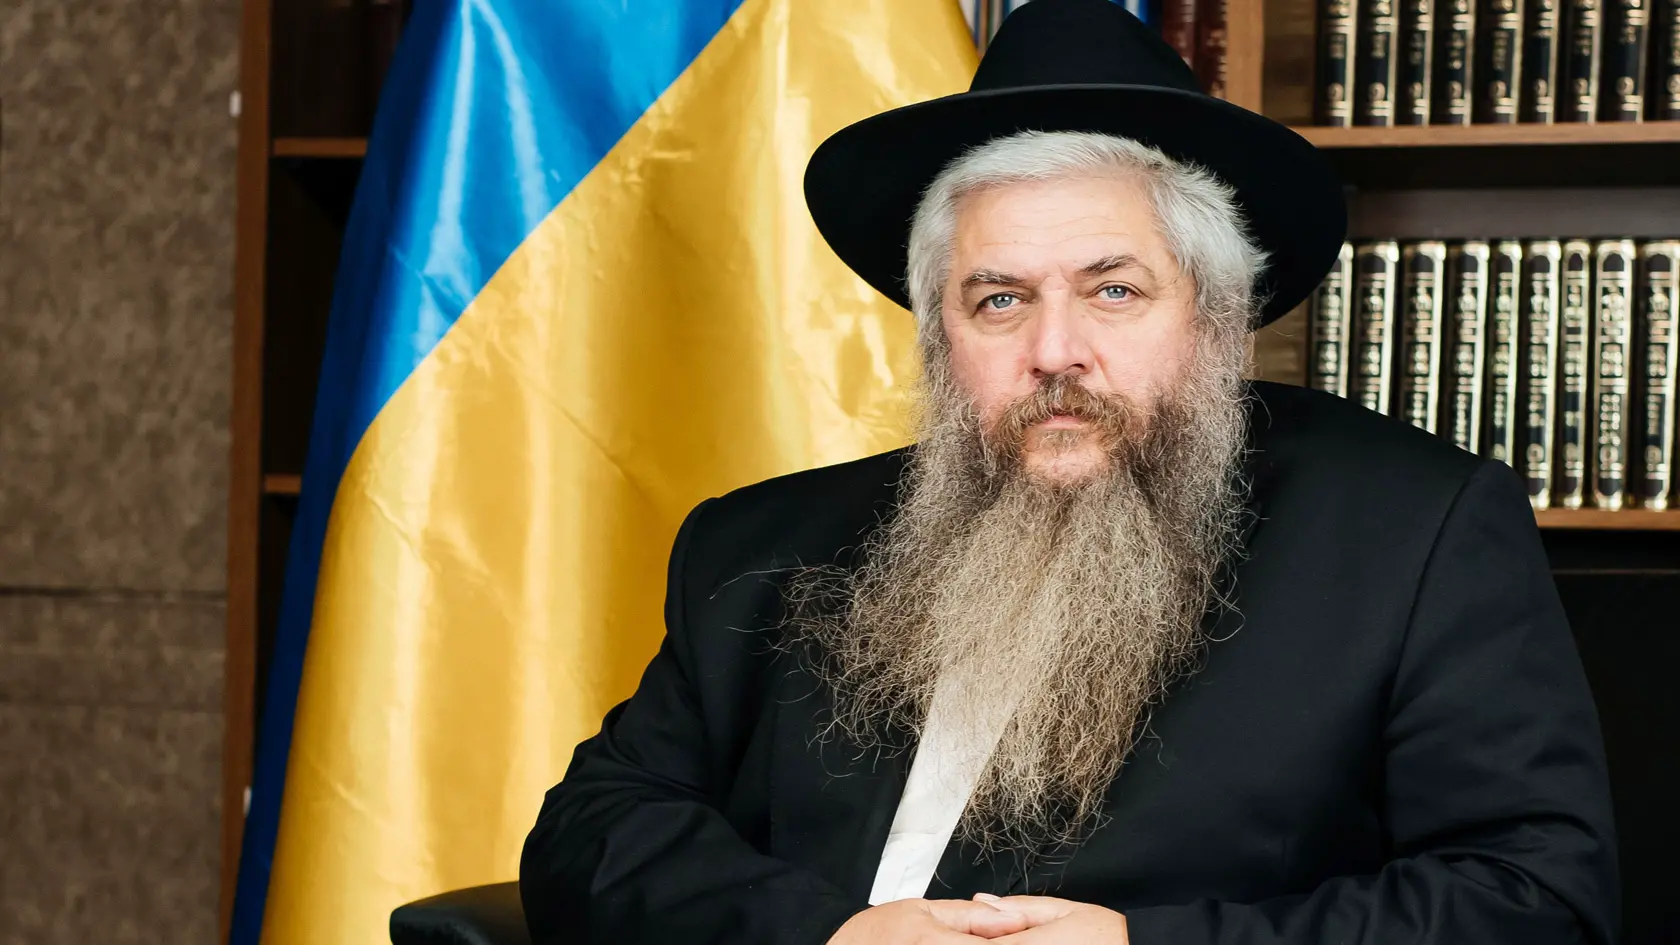 Ukraine's chief rabbi responded to Putin, who called Zelensky "a disgrace to the Jewish people"